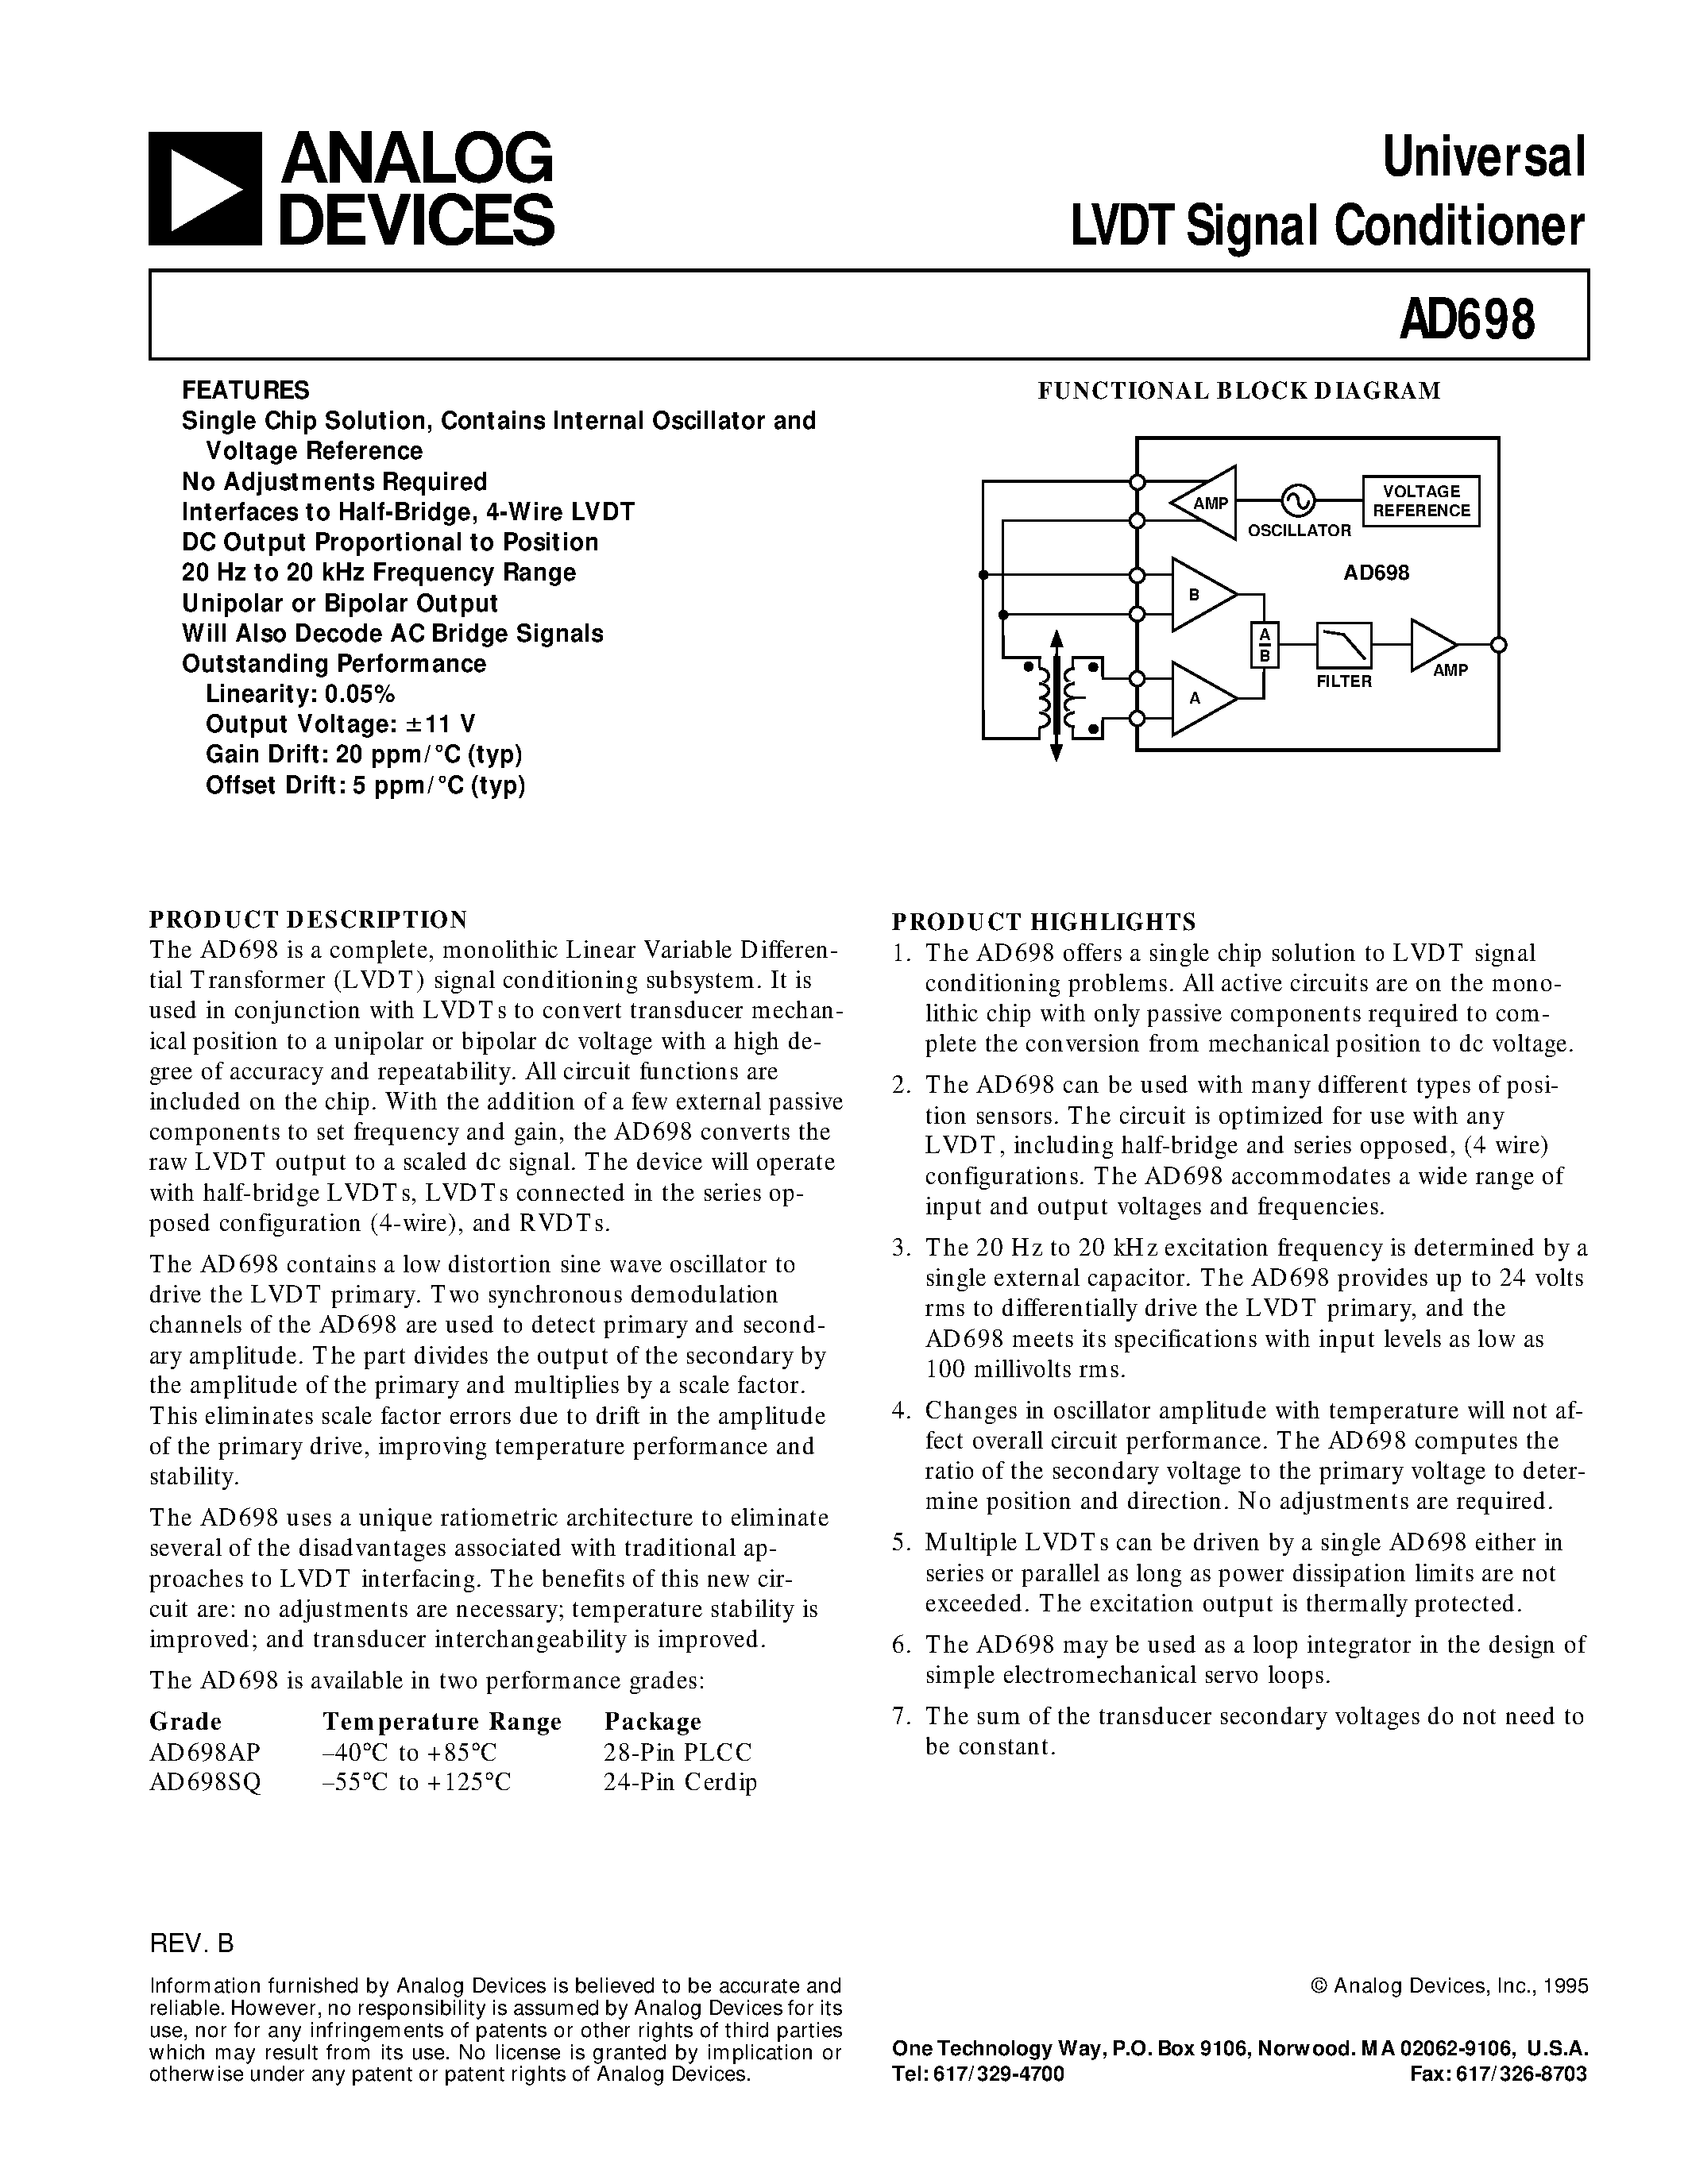 Datasheet AD698 - Universal LVDT Signal Conditioner page 1